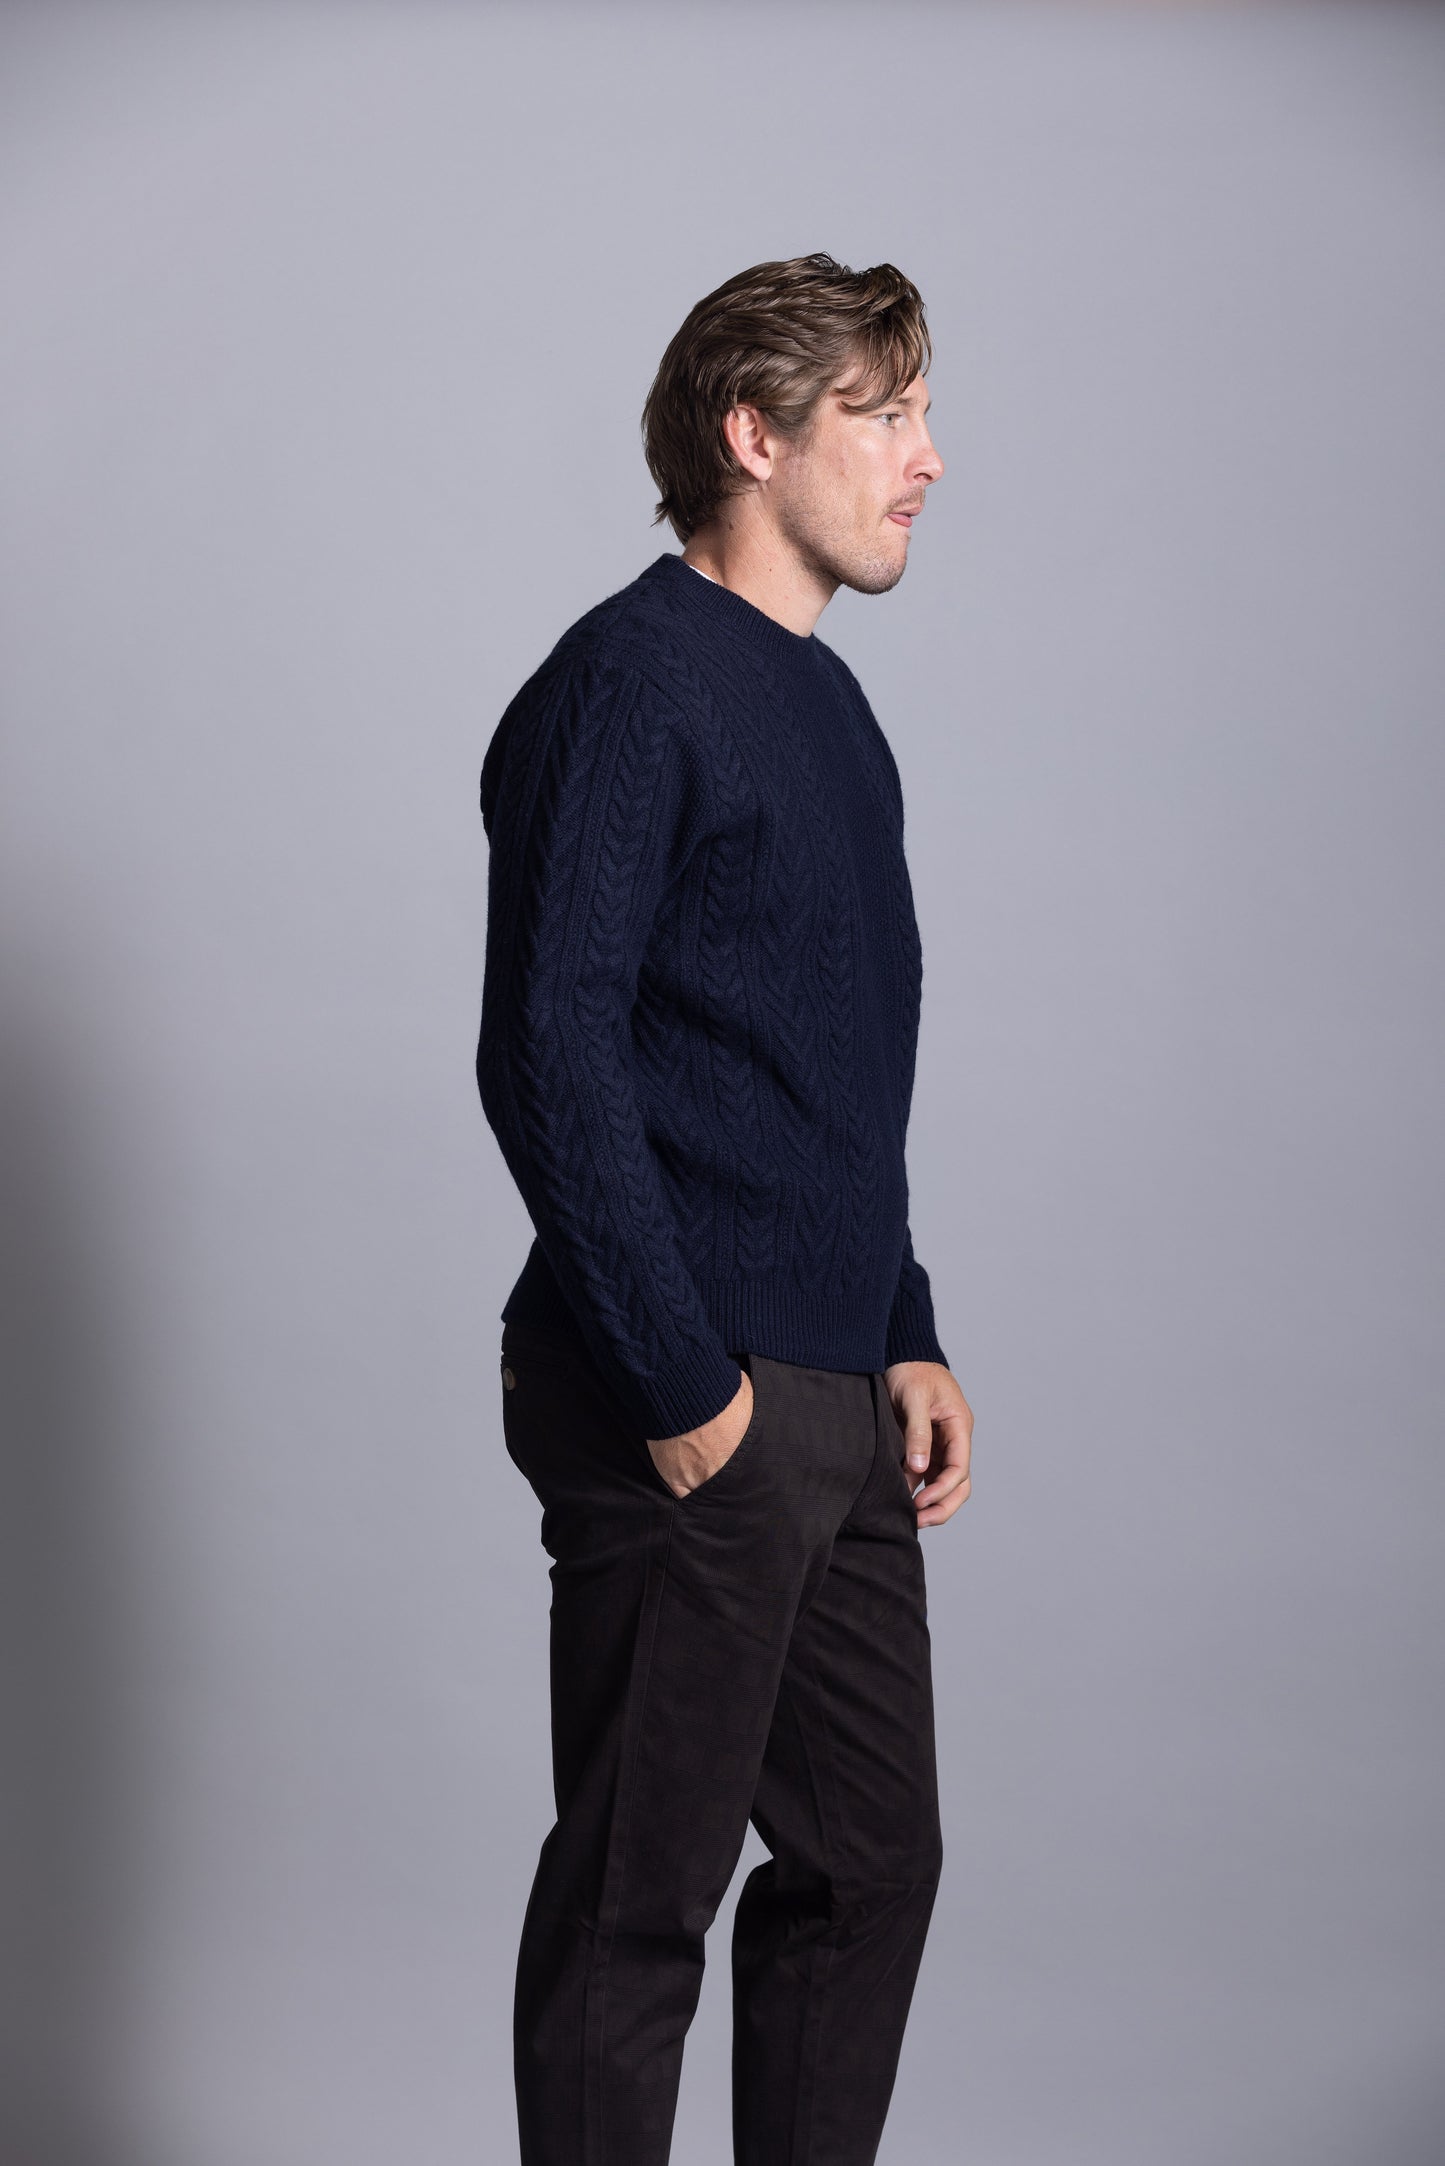 Cutler & Co - Theodore Knitwear - Thunderstorm or Dust